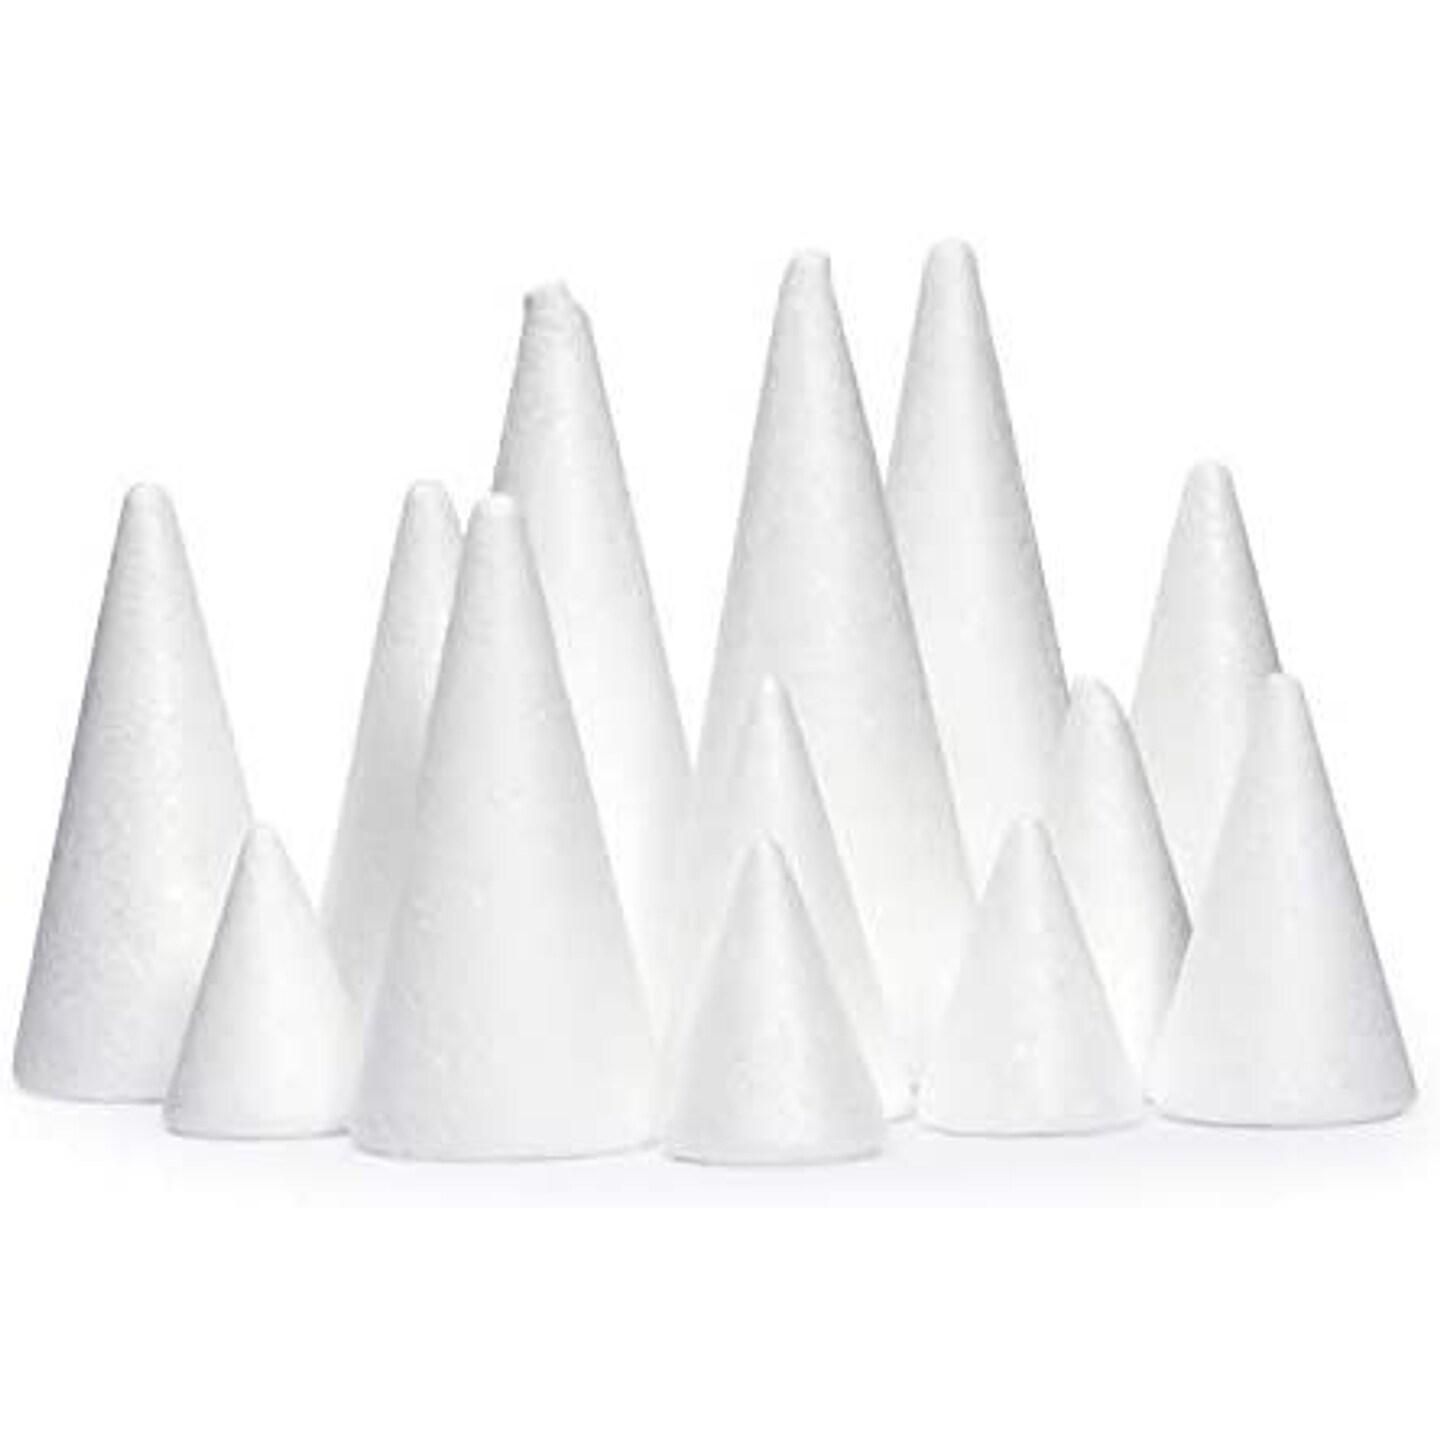 Foam Cones for Crafts (2.7 x 5.5 in, White, 12 Pack) –  BrightCreationsOfficial